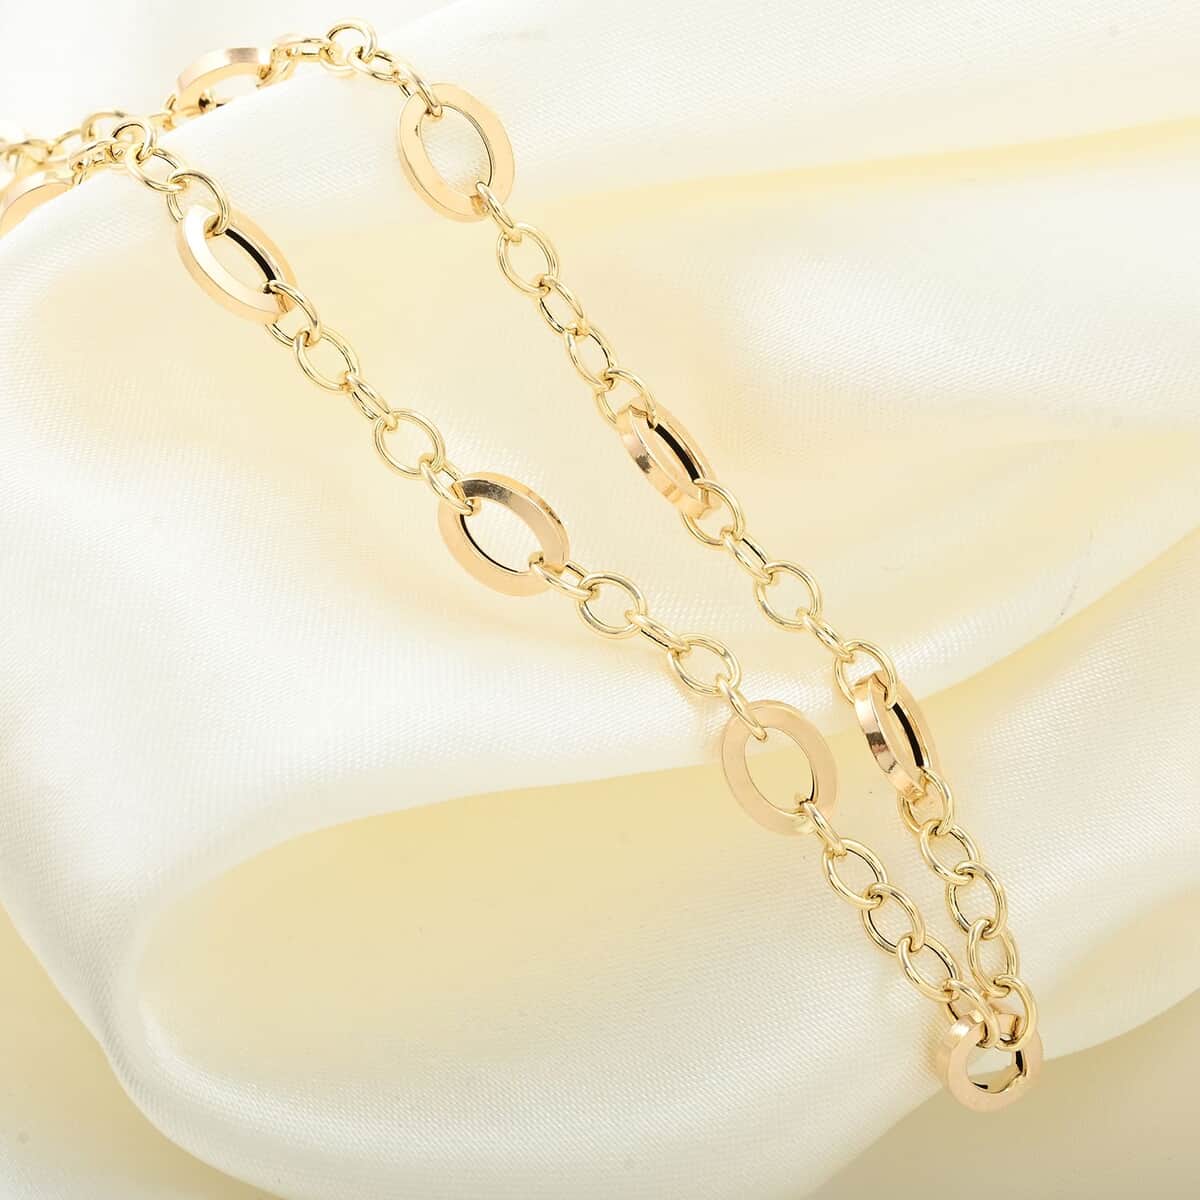 Preziosa Italian 14K Yellow Gold Chain Necklace 18-20 Inches 4.04 Grams image number 1